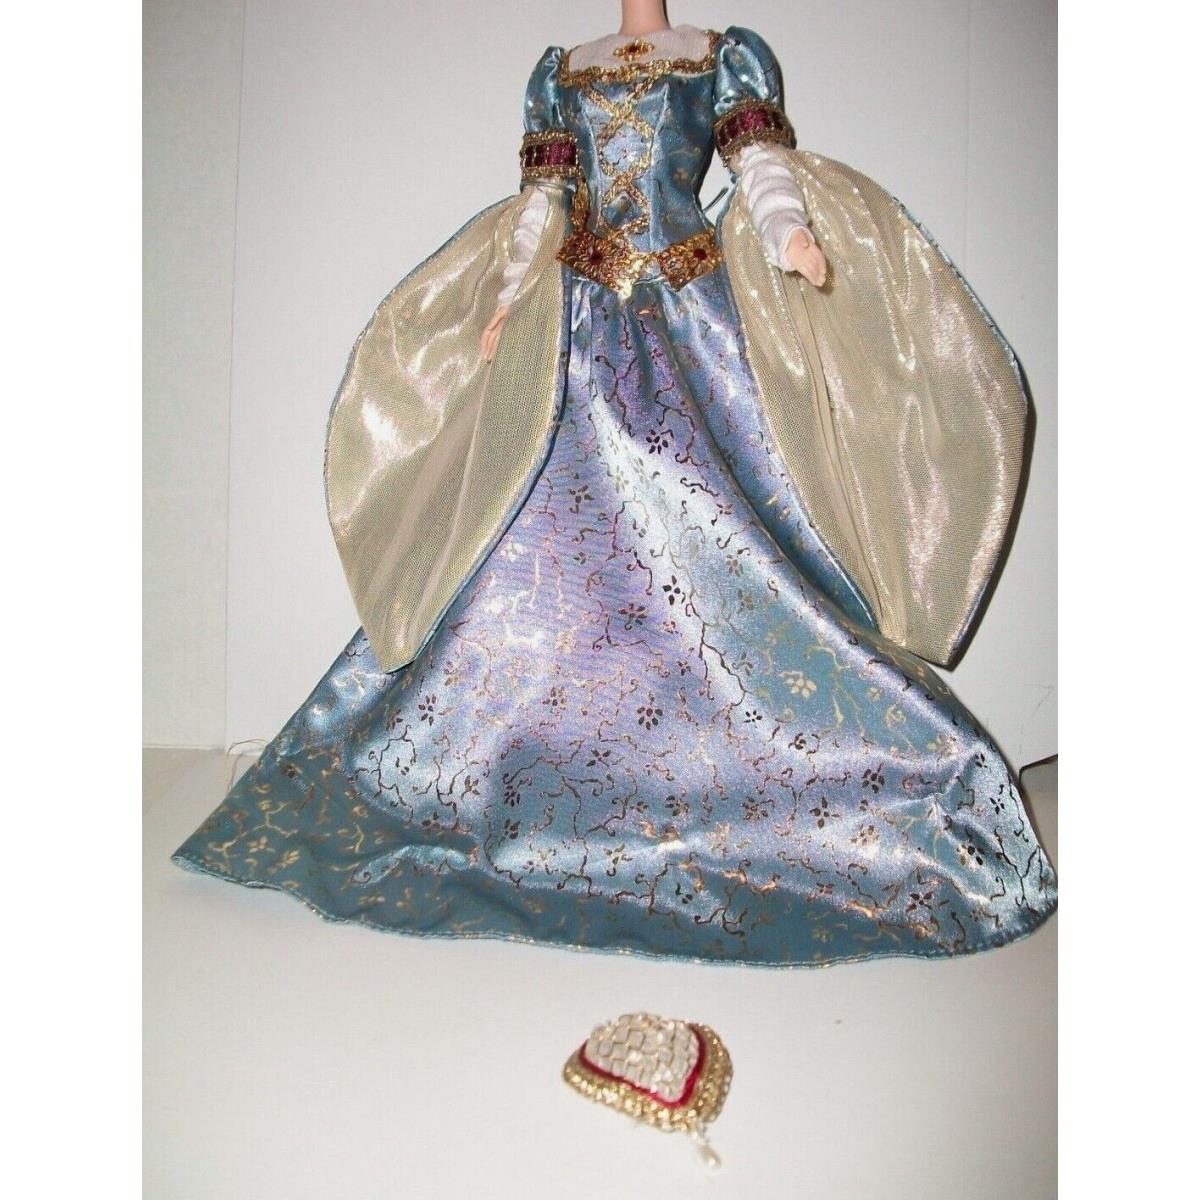 From Box CE Barbie Medieval Era Guinevere Dress Headpiece Only Clothes